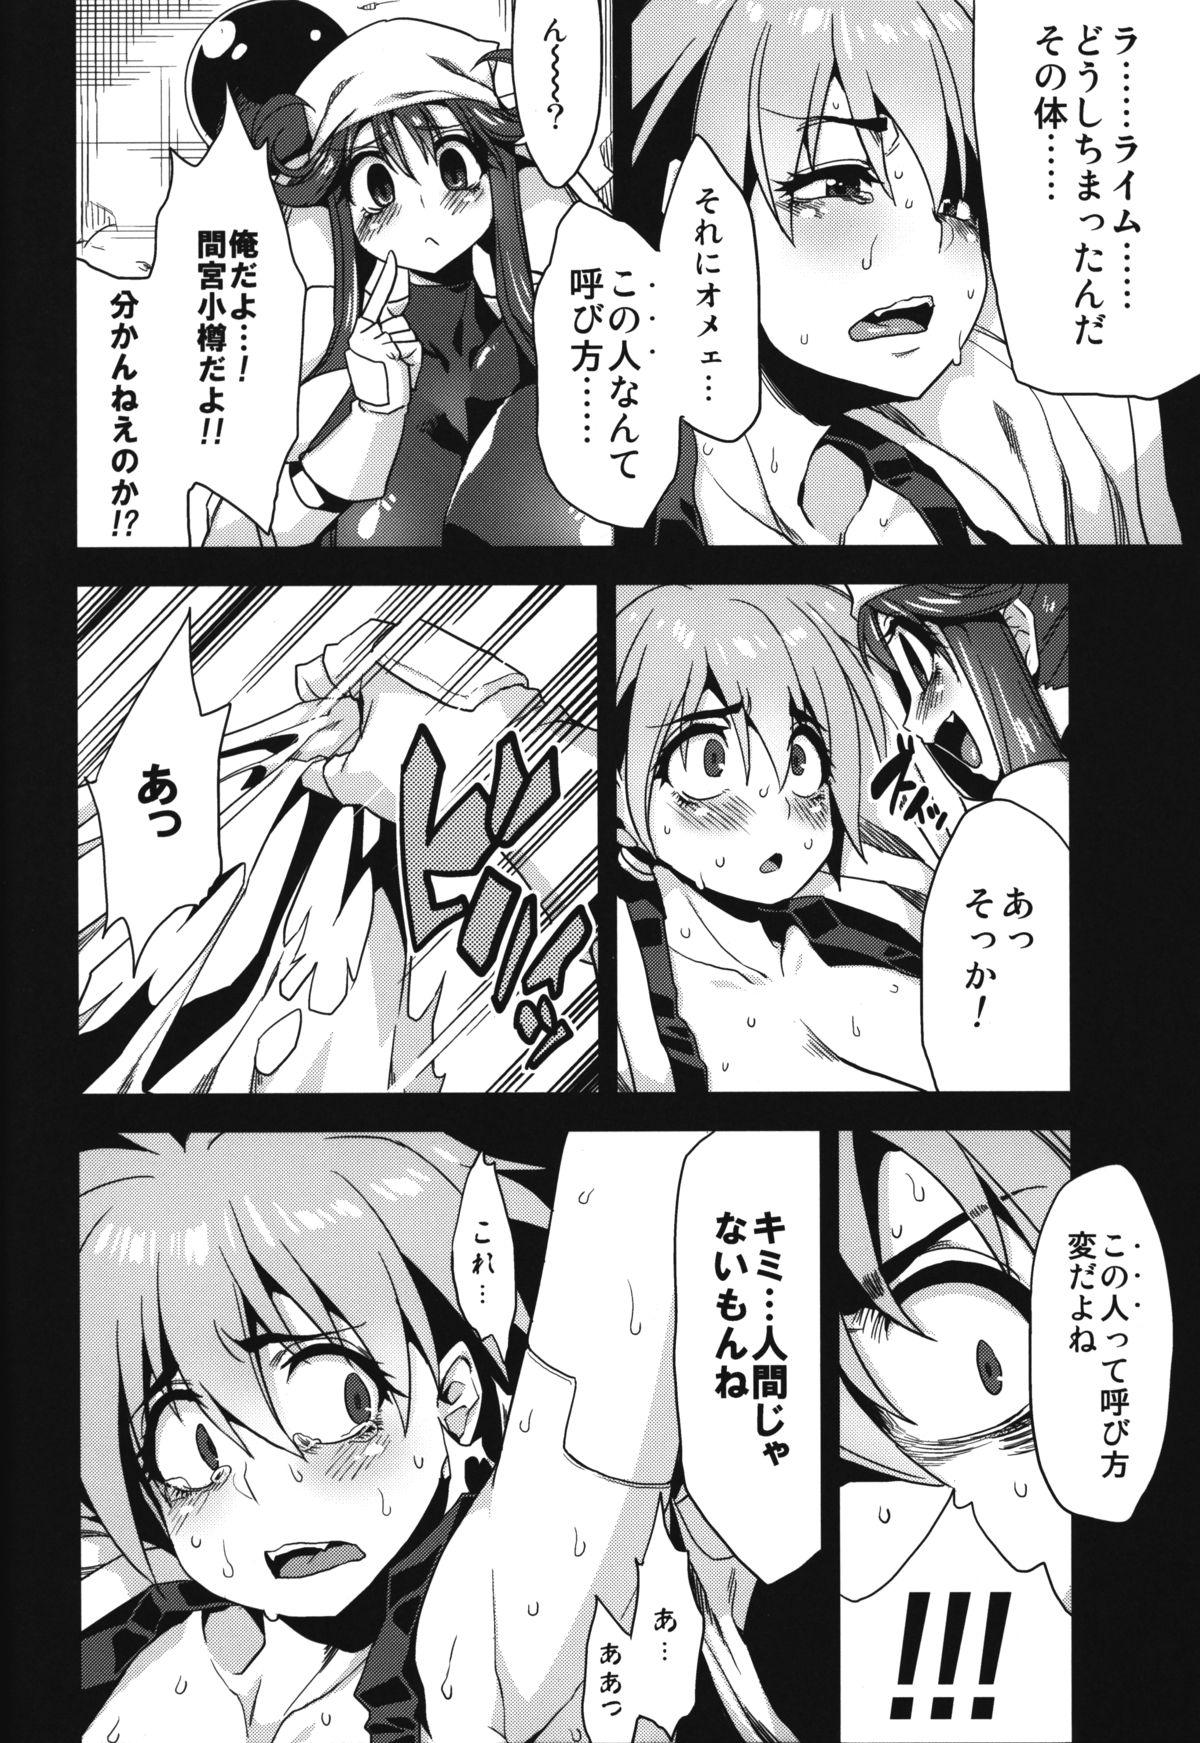 Gay Outinpublic Hentai Marionette 3 - Saber marionette Self - Page 5